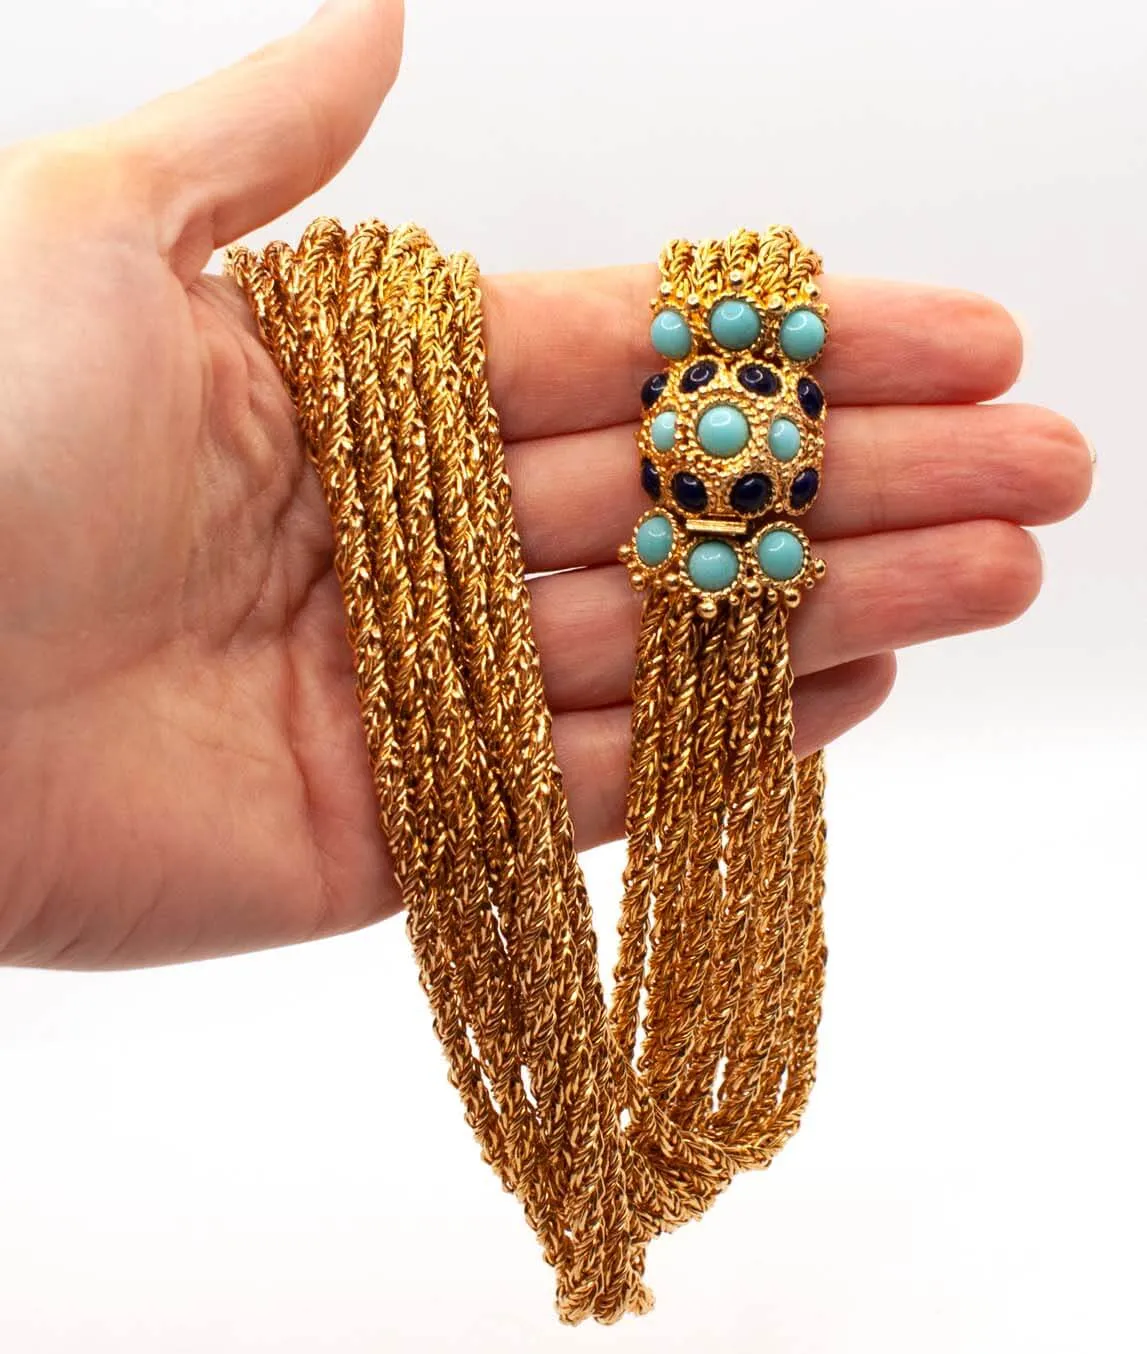 Christian Dior chain necklace with turquoise and blue glass decorative clasp held in a hand